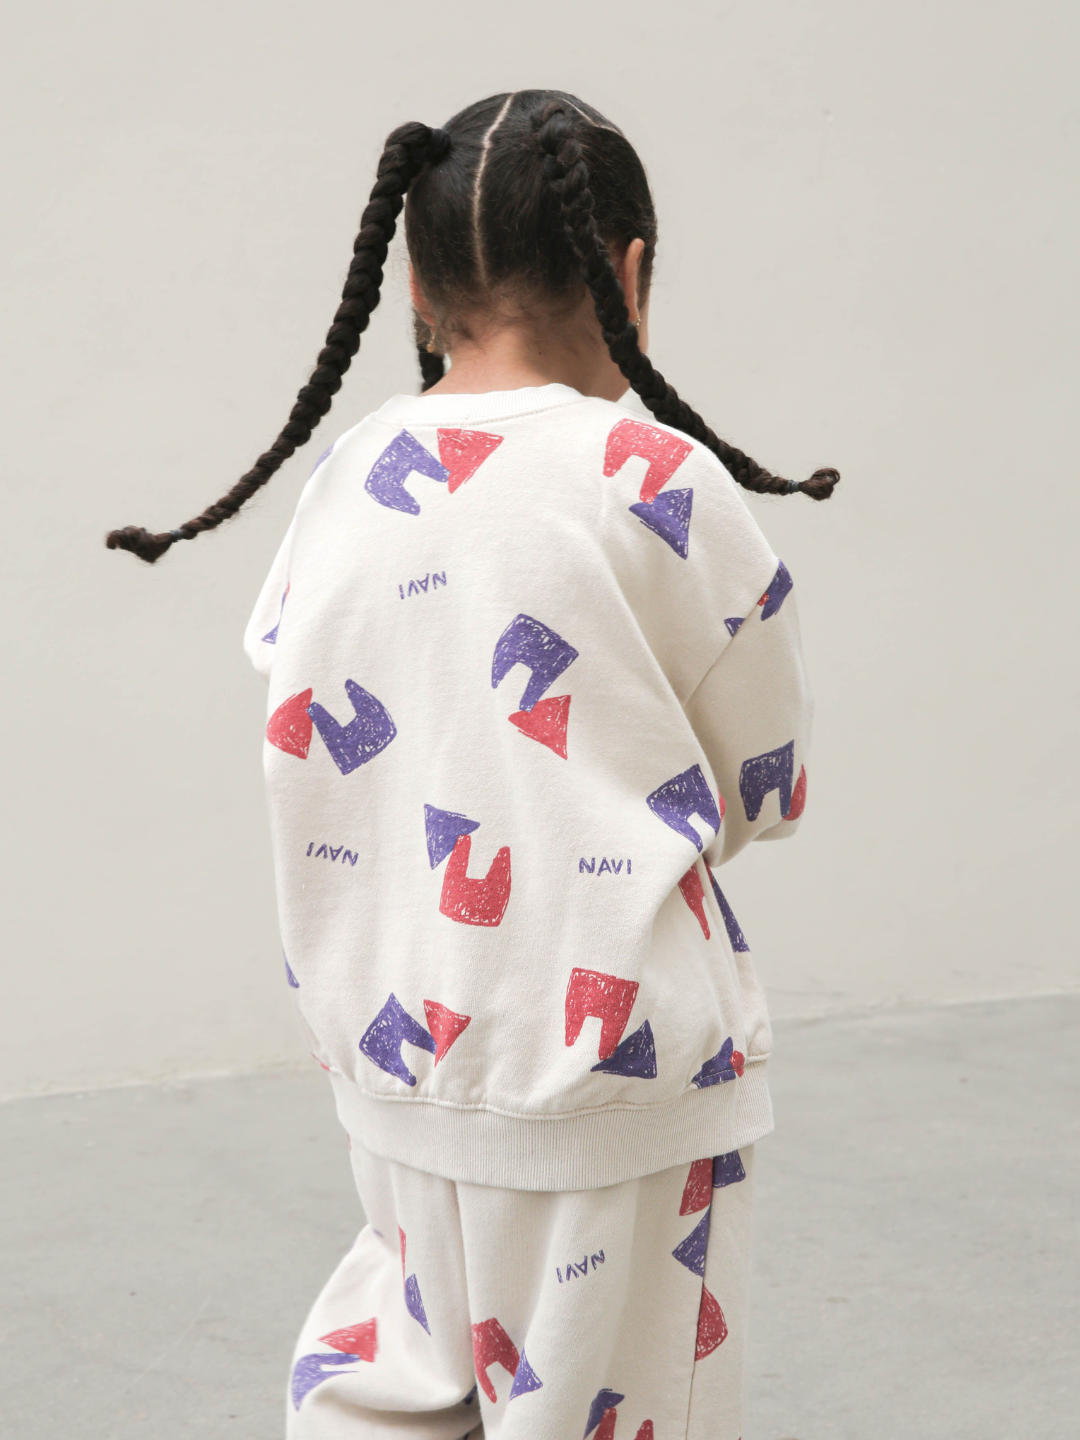 Oatmeal | Back view of child wearing beige crewneck sweatshirt with an all over pattern of red and purple shapes and the brand name Navi, with matching sweatpants. She stands on a beige background and wears her hair in three long braids.